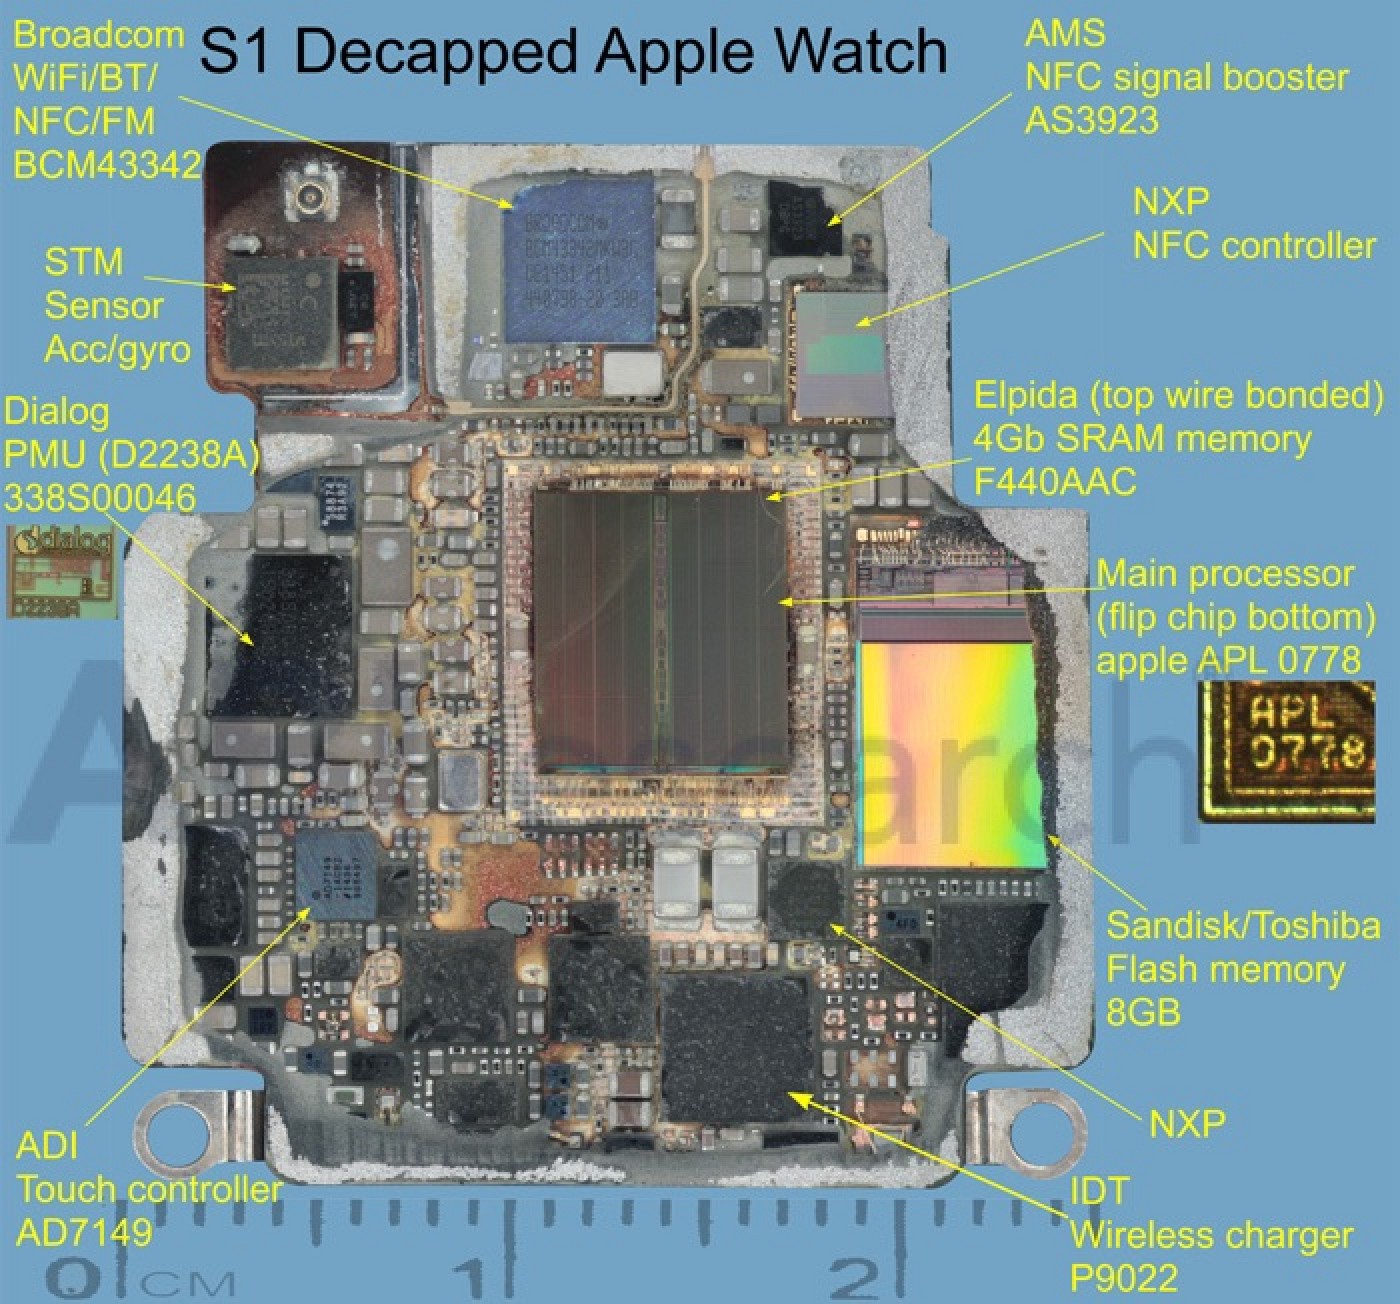 Early Looks Inside Apple Watch's S1 Chip Confirm 512 MB RAM, Unexpected